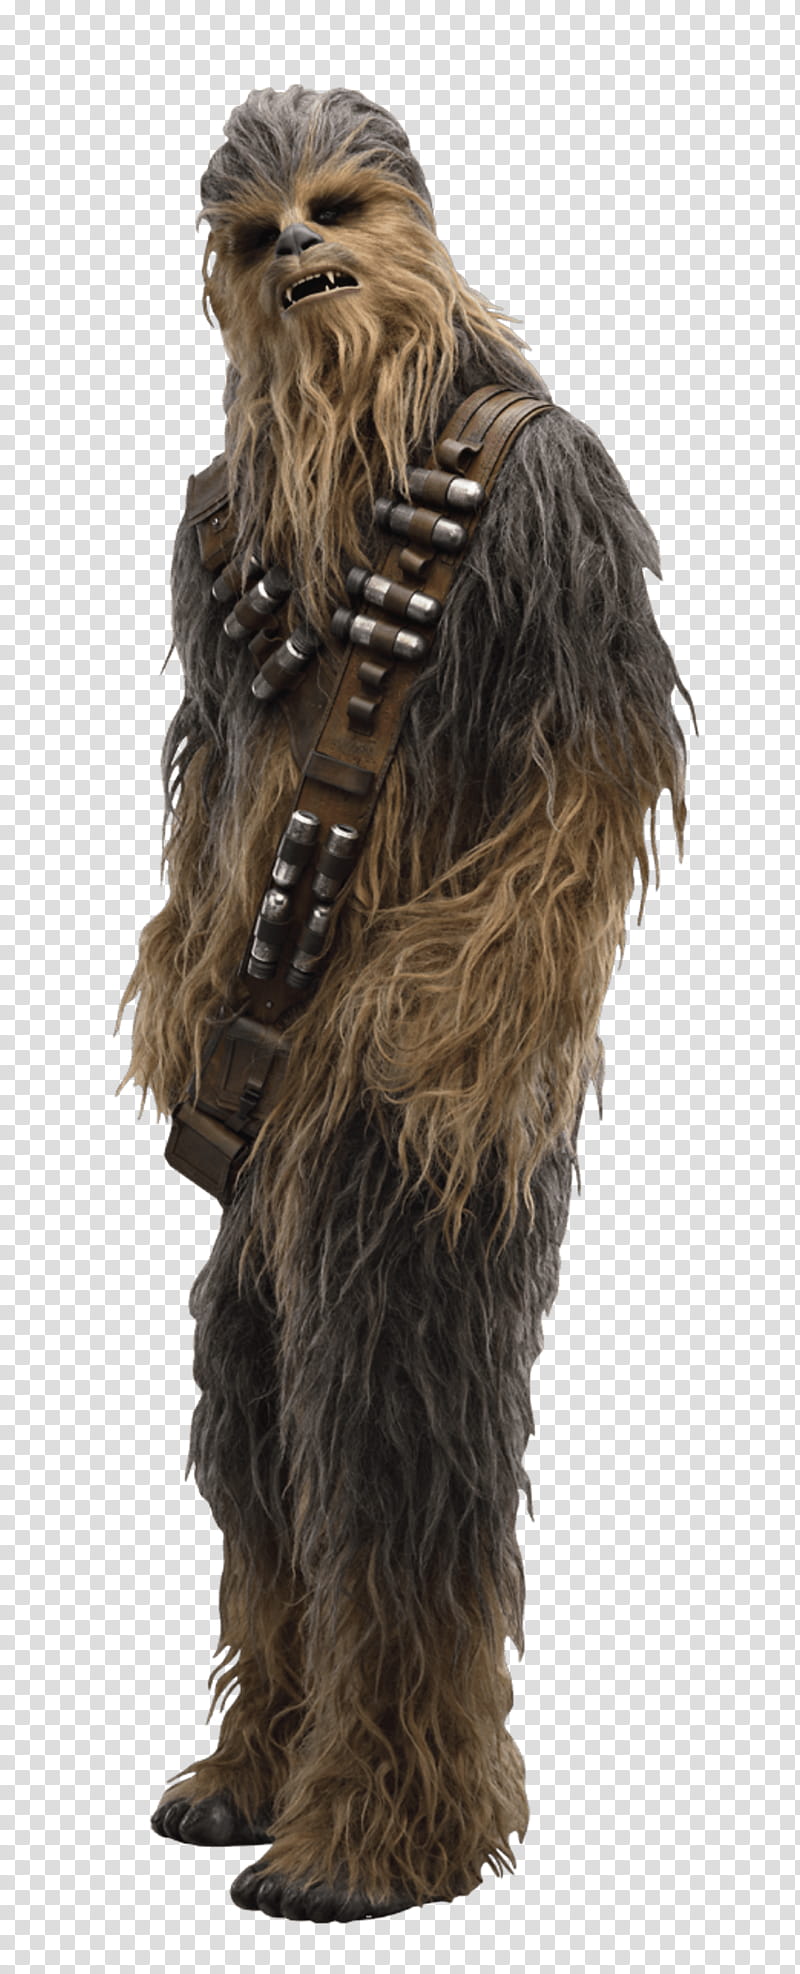 Chewbacca Transparent Background Png Clipart Hiclipart